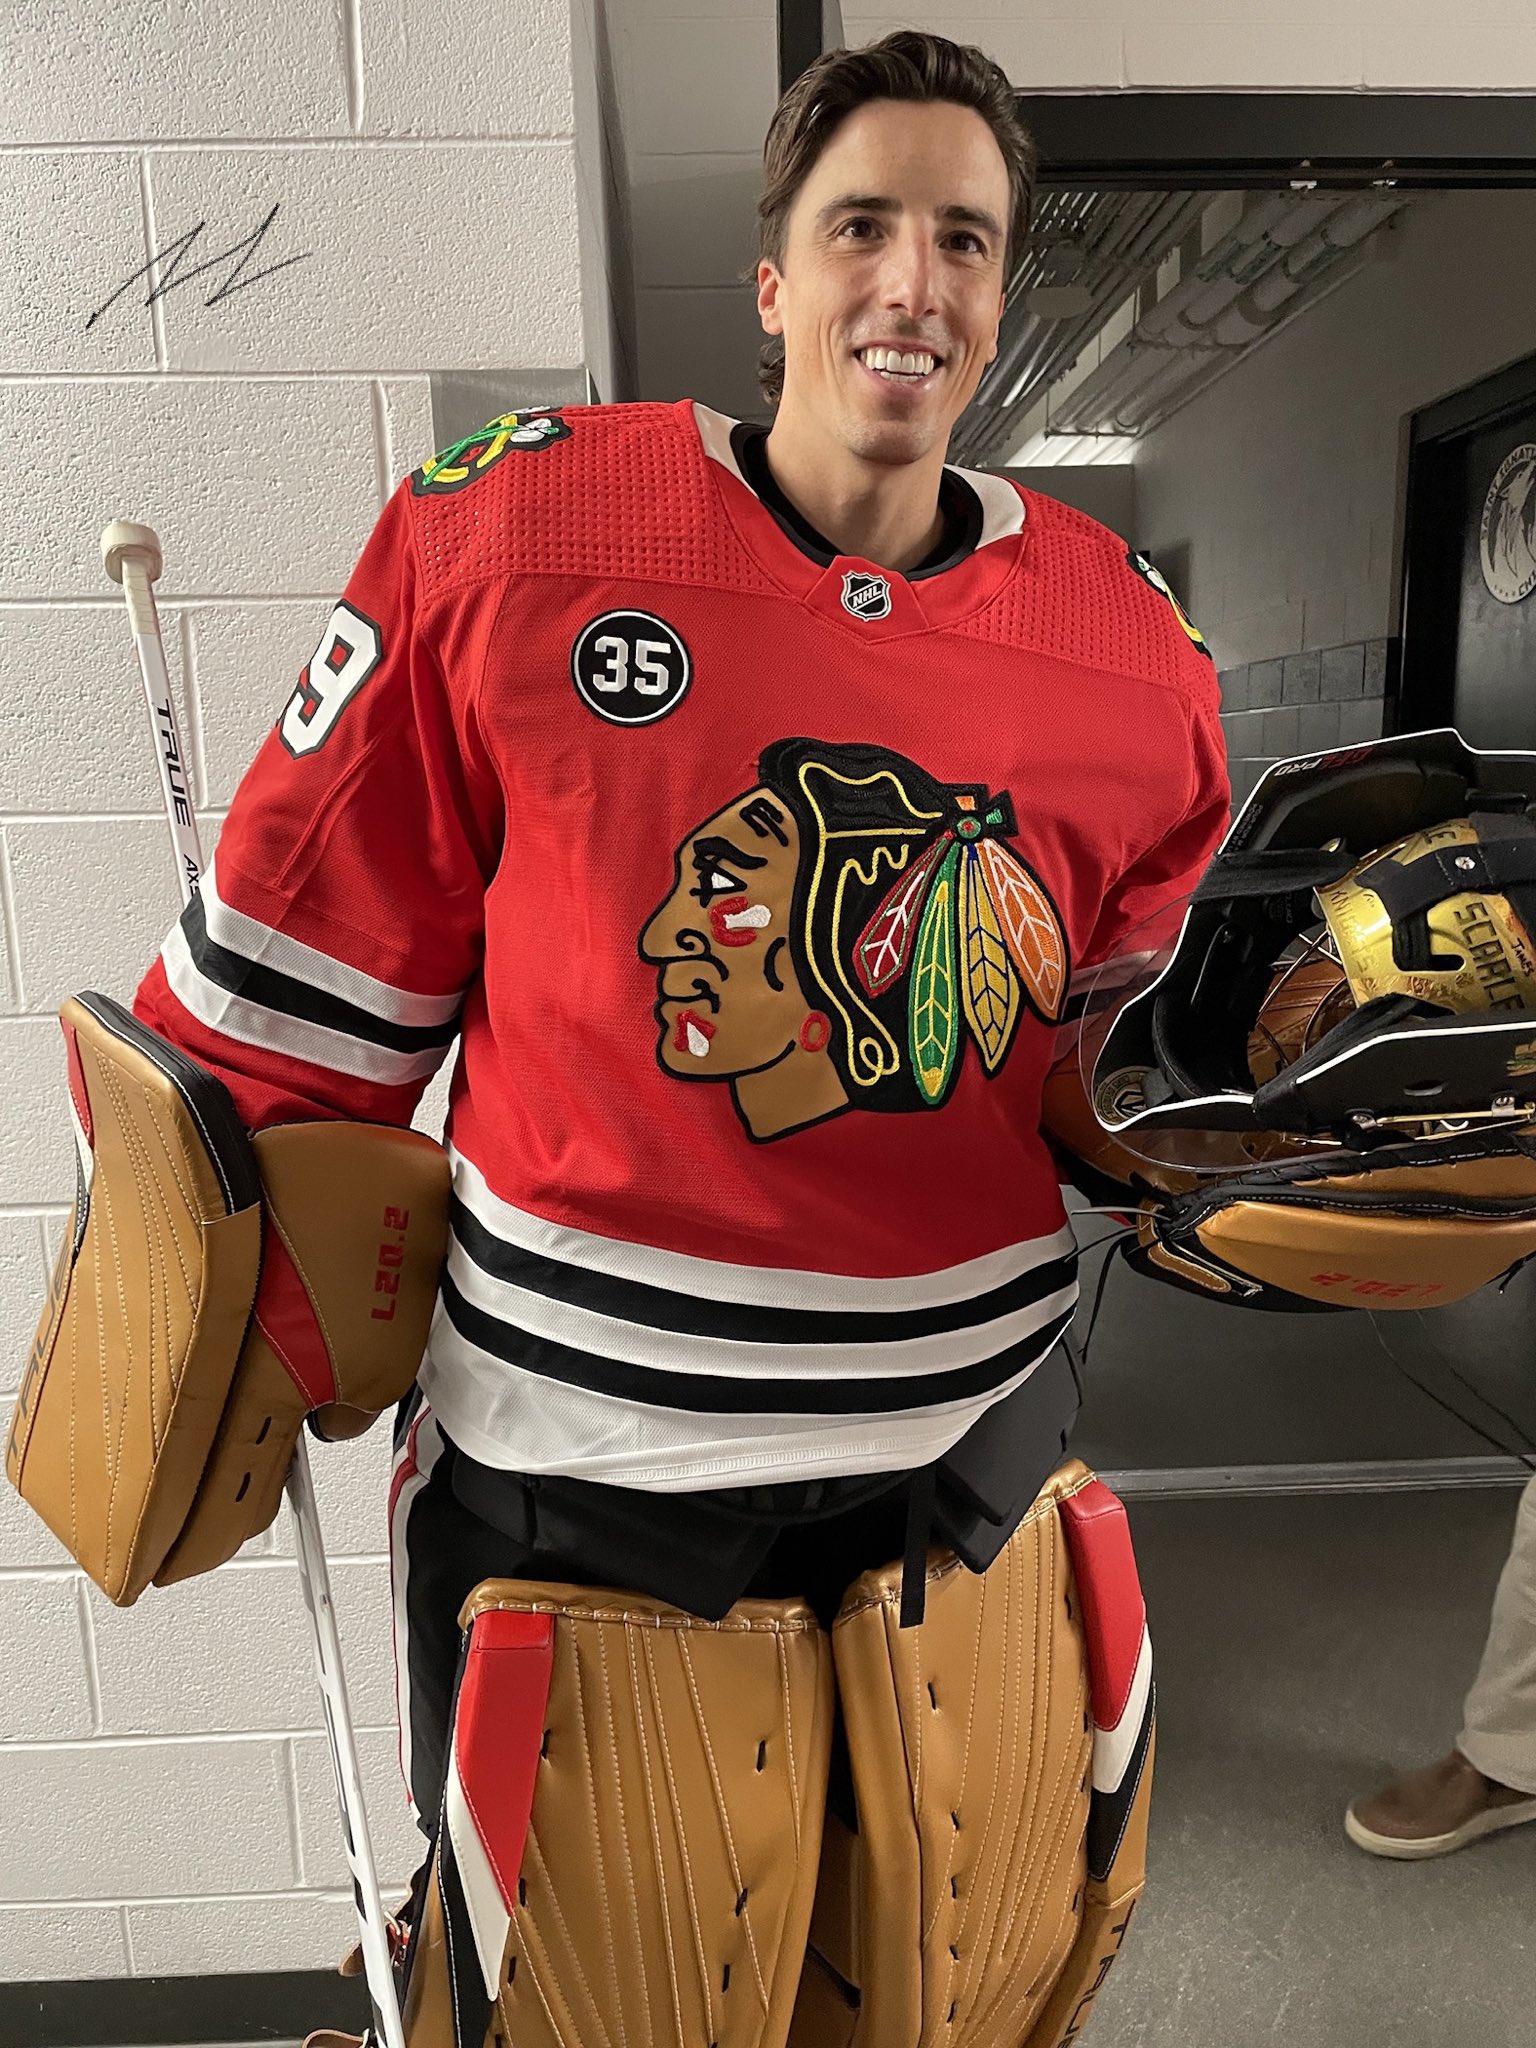 Fleury goes back to the all-gold look with new gear for Wild